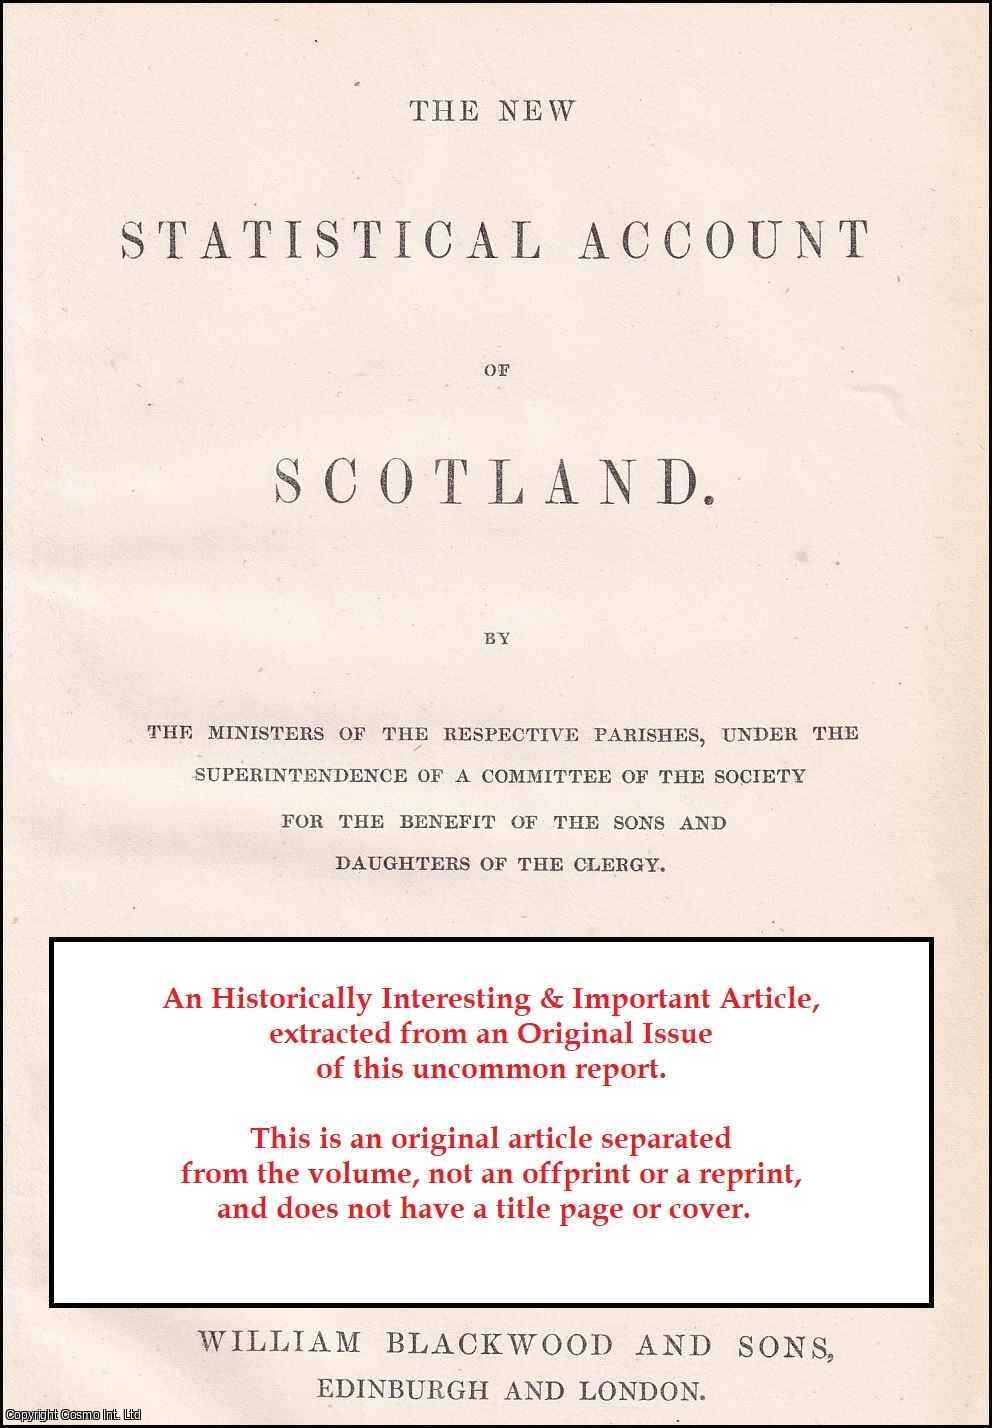 Rev. David Baxter - Parish of Lilliesleaf. Presbytery of Selkirk, Synod of Merse and Tiviotdale. An uncommon original article from The New Statistical Account of Scotland, 1845.